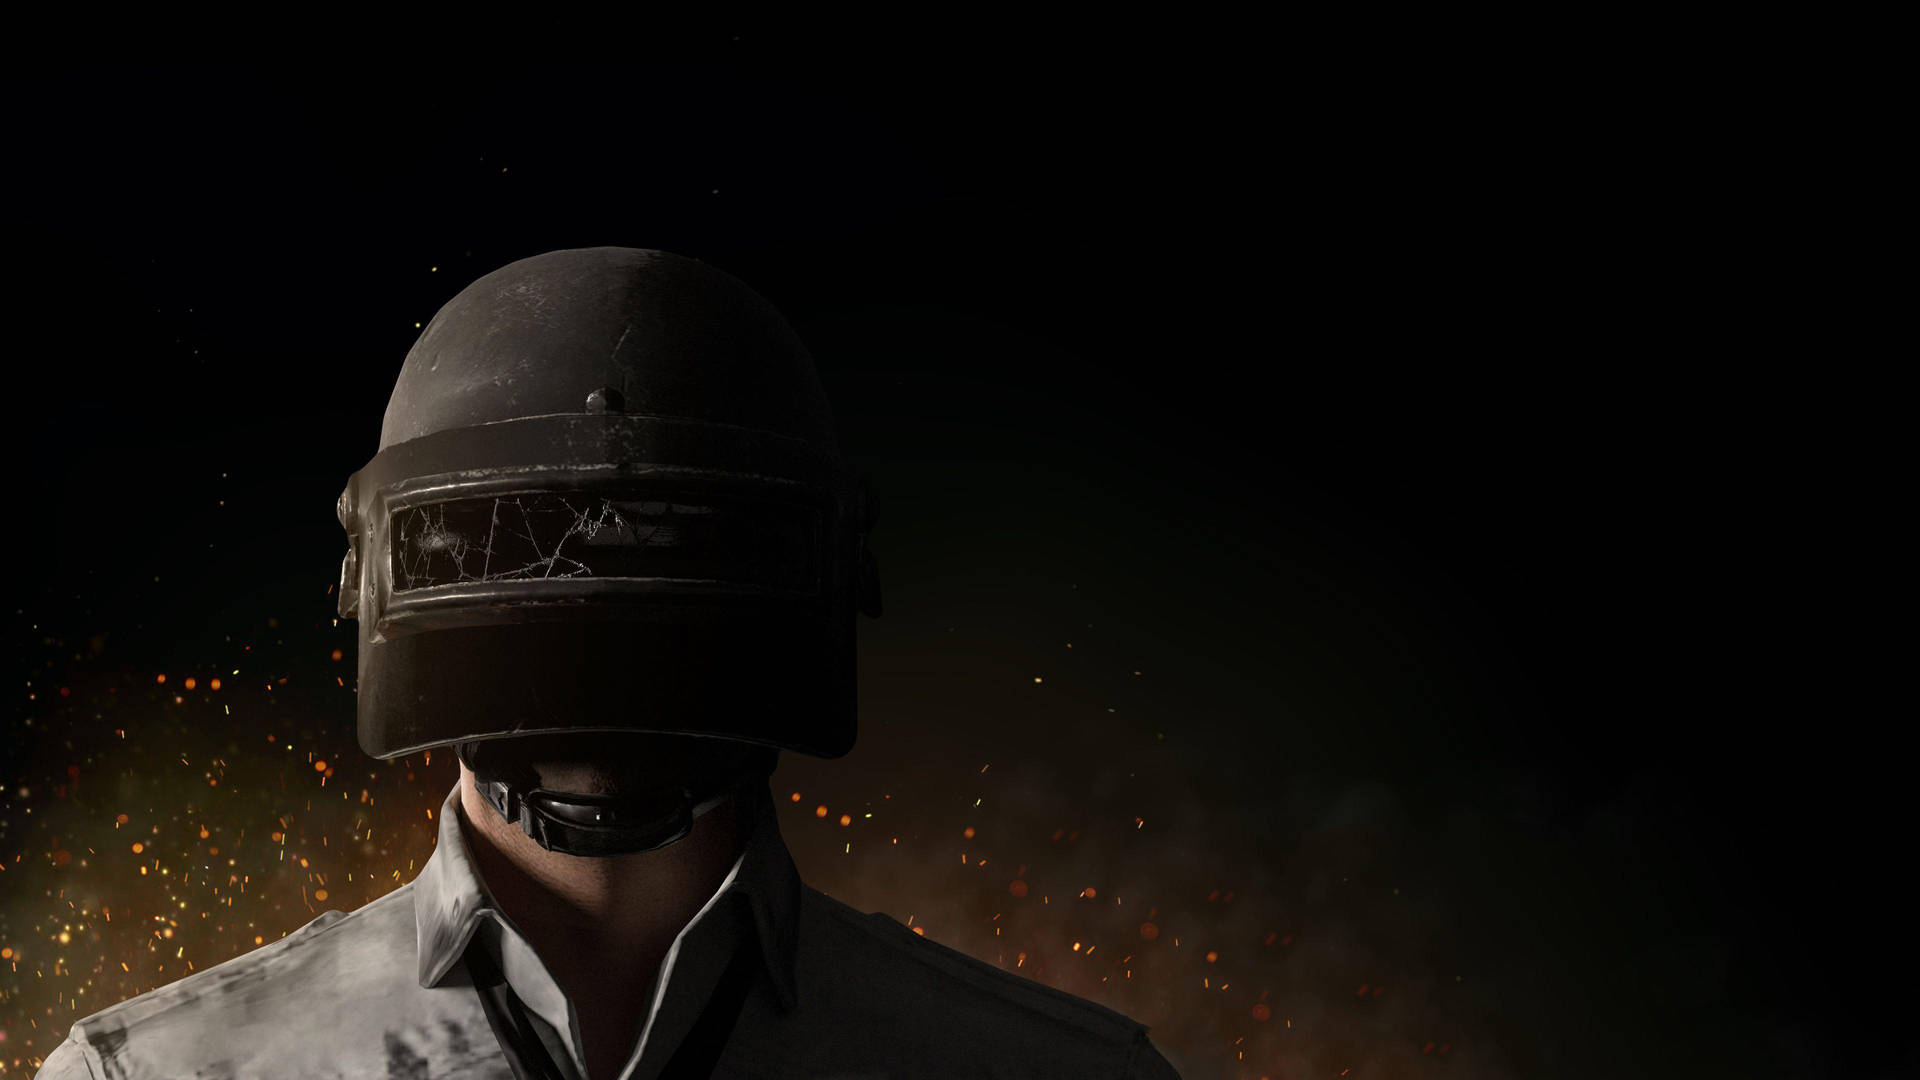 Pubg Hd Helmet Character And Orange Particles Background